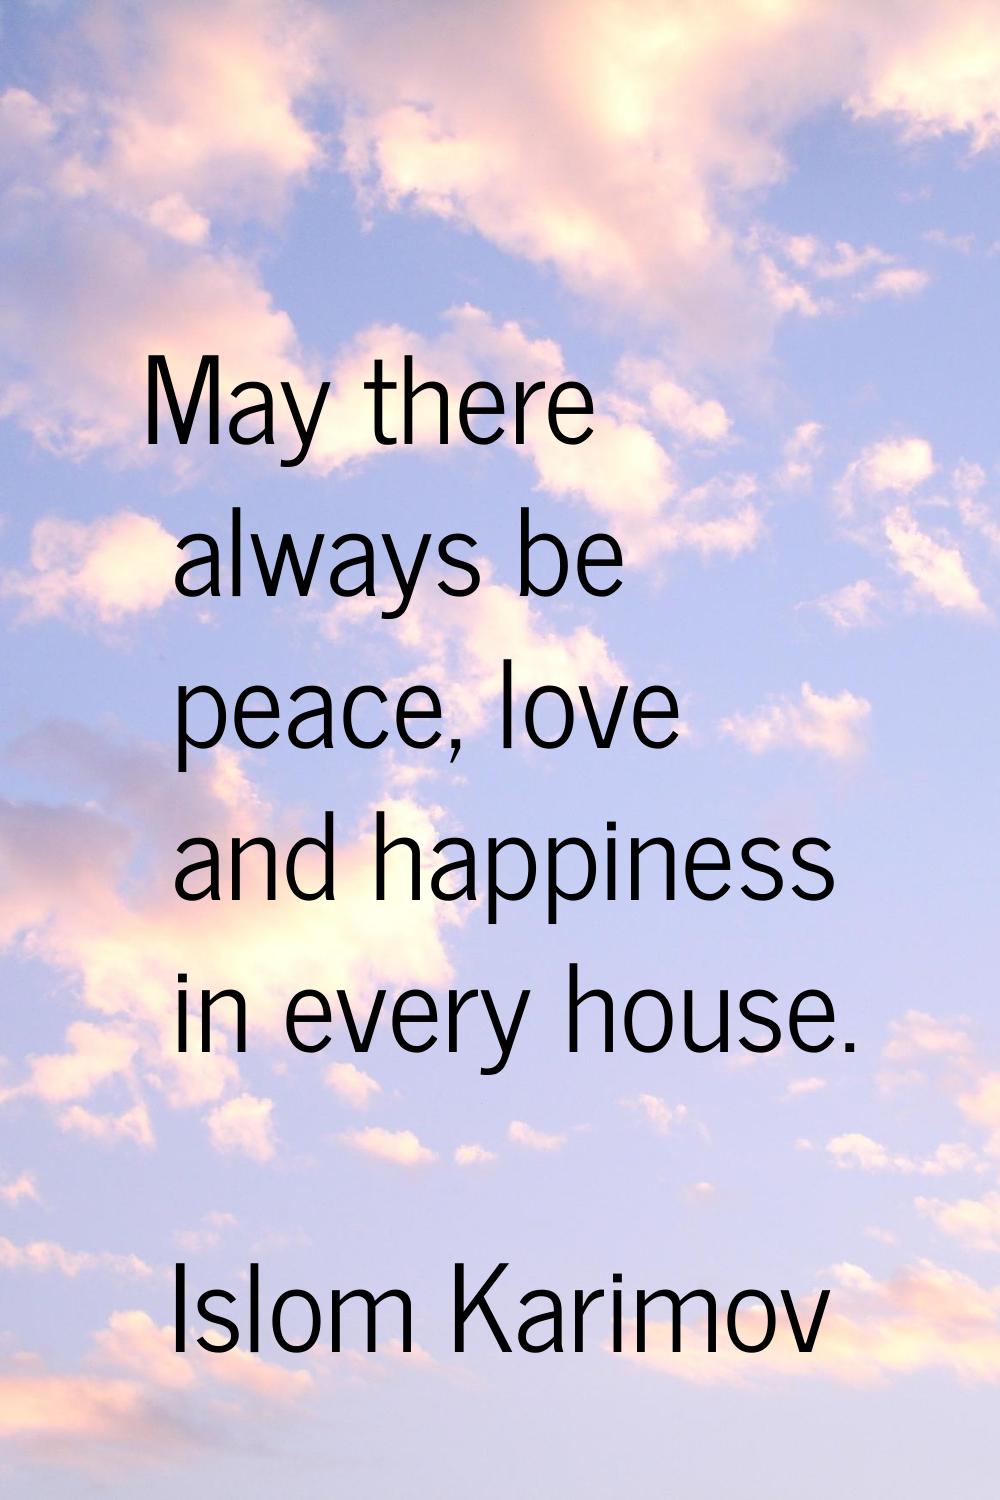 May there always be peace, love and happiness in every house.